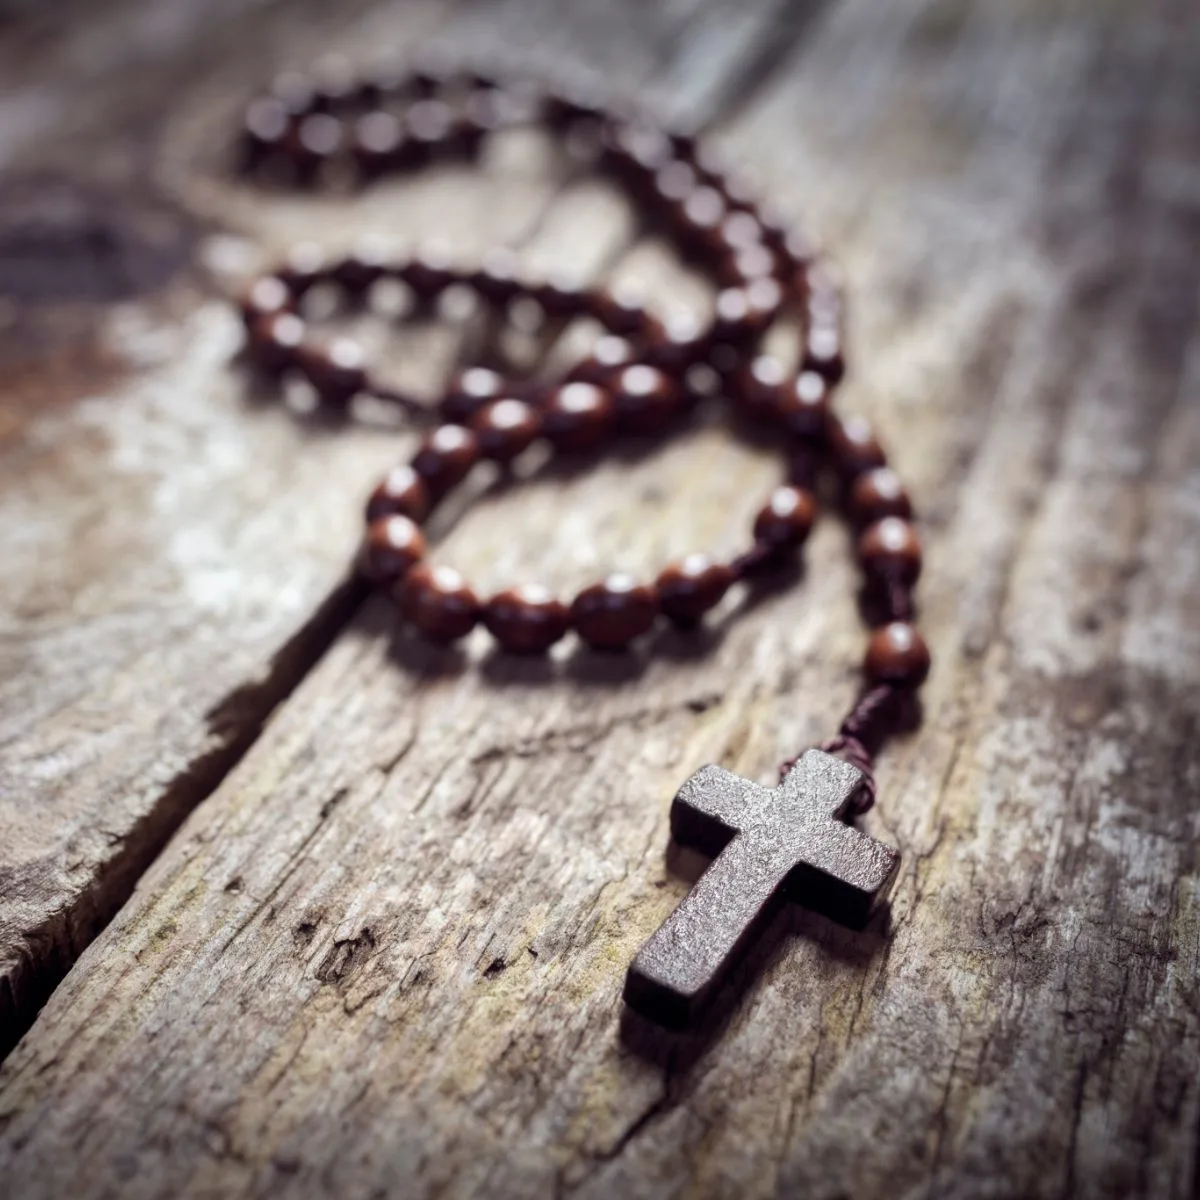 What is the spiritual meaning of a broken rosary